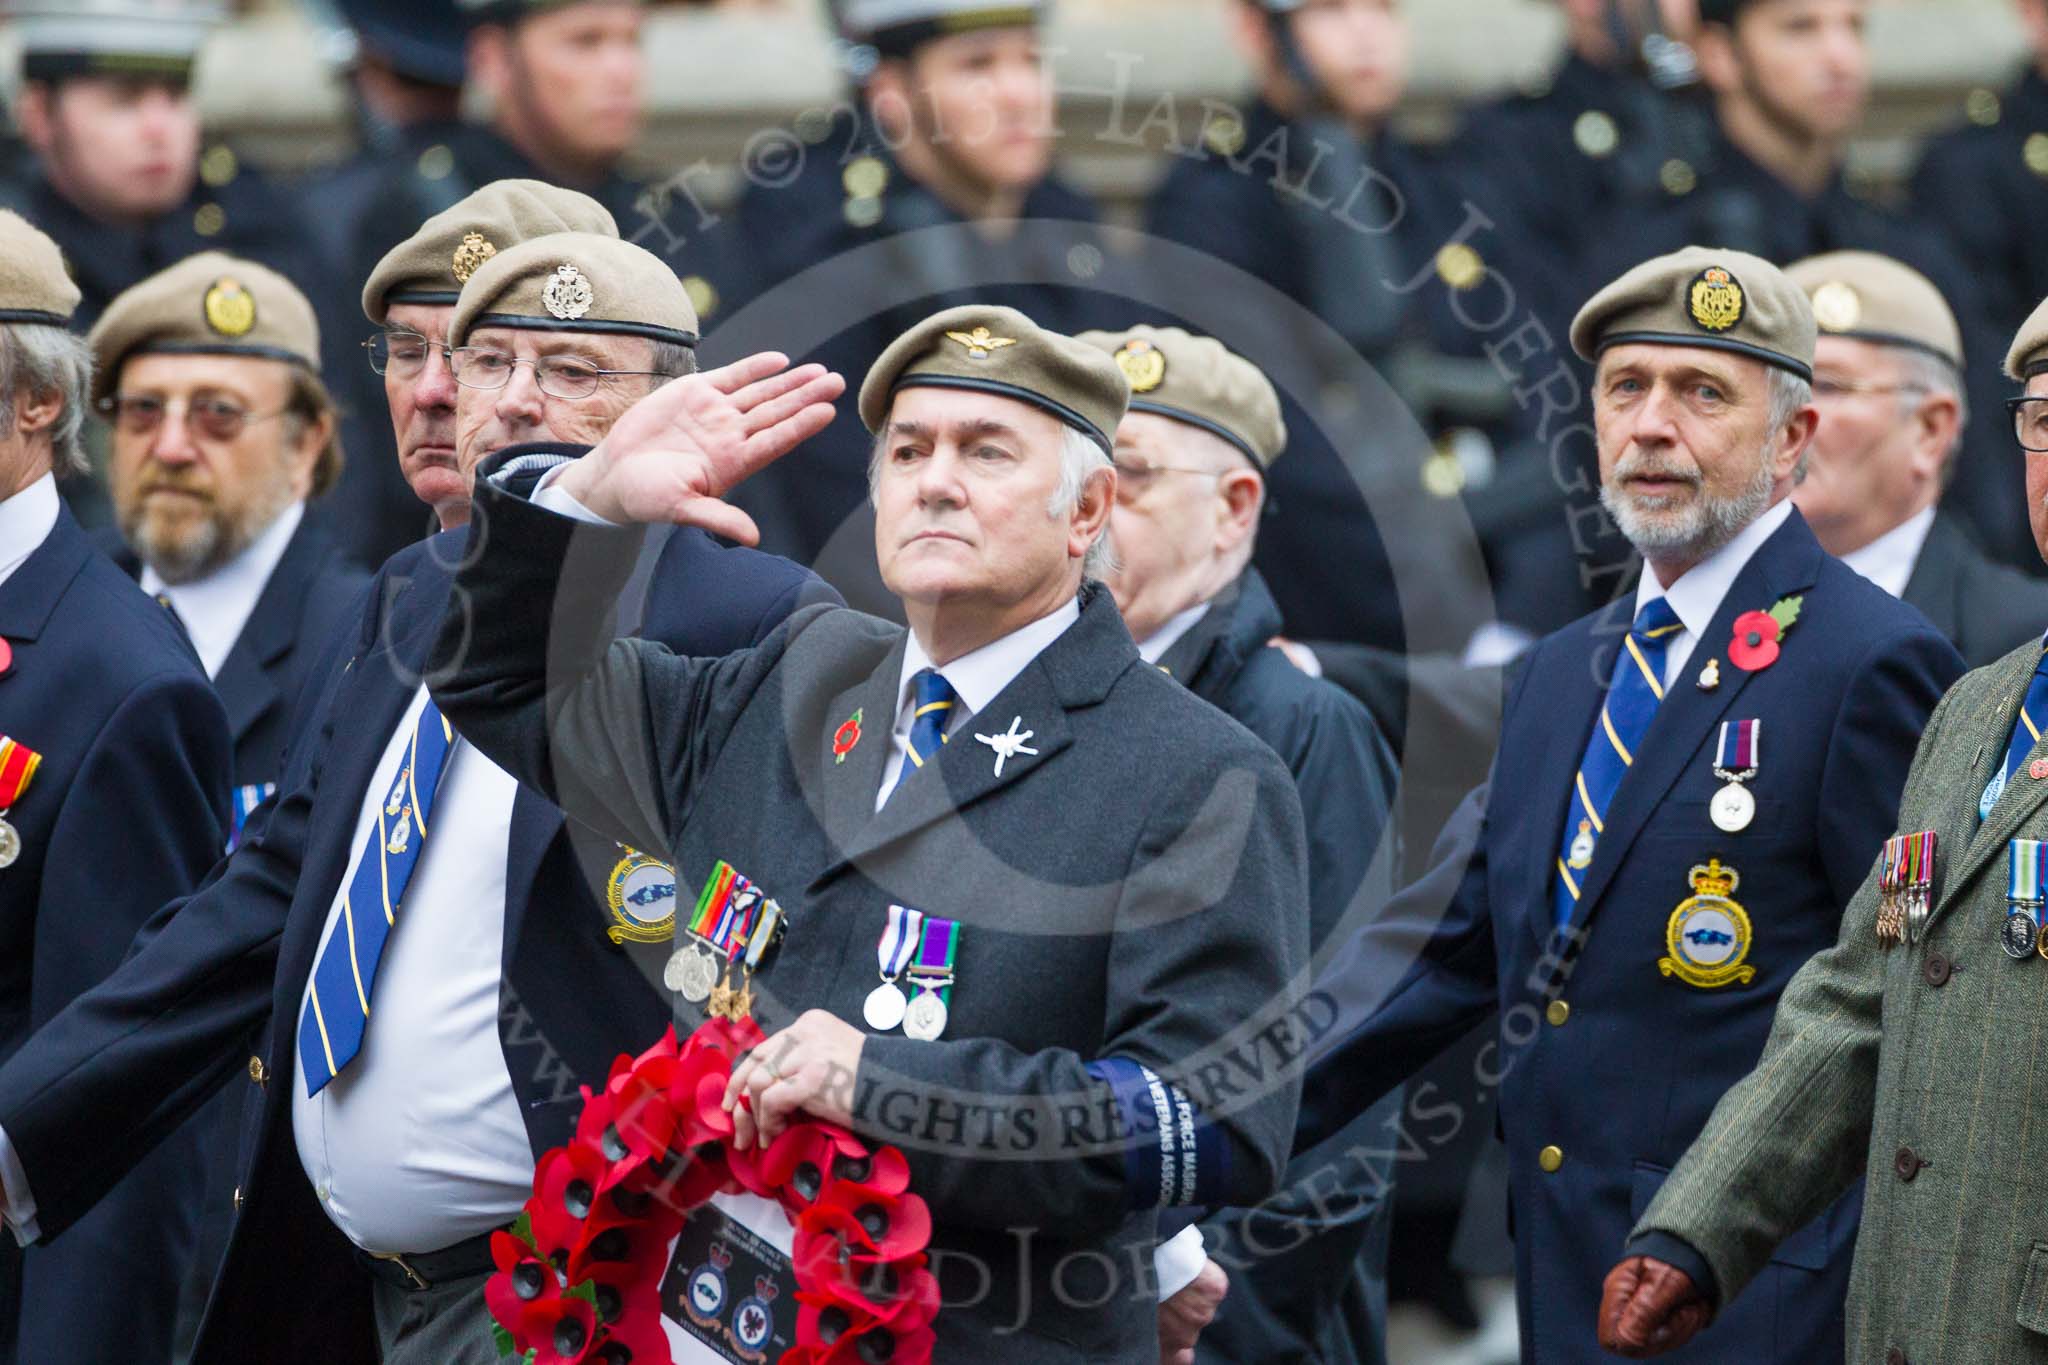 Remembrance Sunday at the Cenotaph 2015: Group C18, Royal Air Force Masirah & Salalah Veterans Association (New for 2015).
Cenotaph, Whitehall, London SW1,
London,
Greater London,
United Kingdom,
on 08 November 2015 at 11:49, image #526